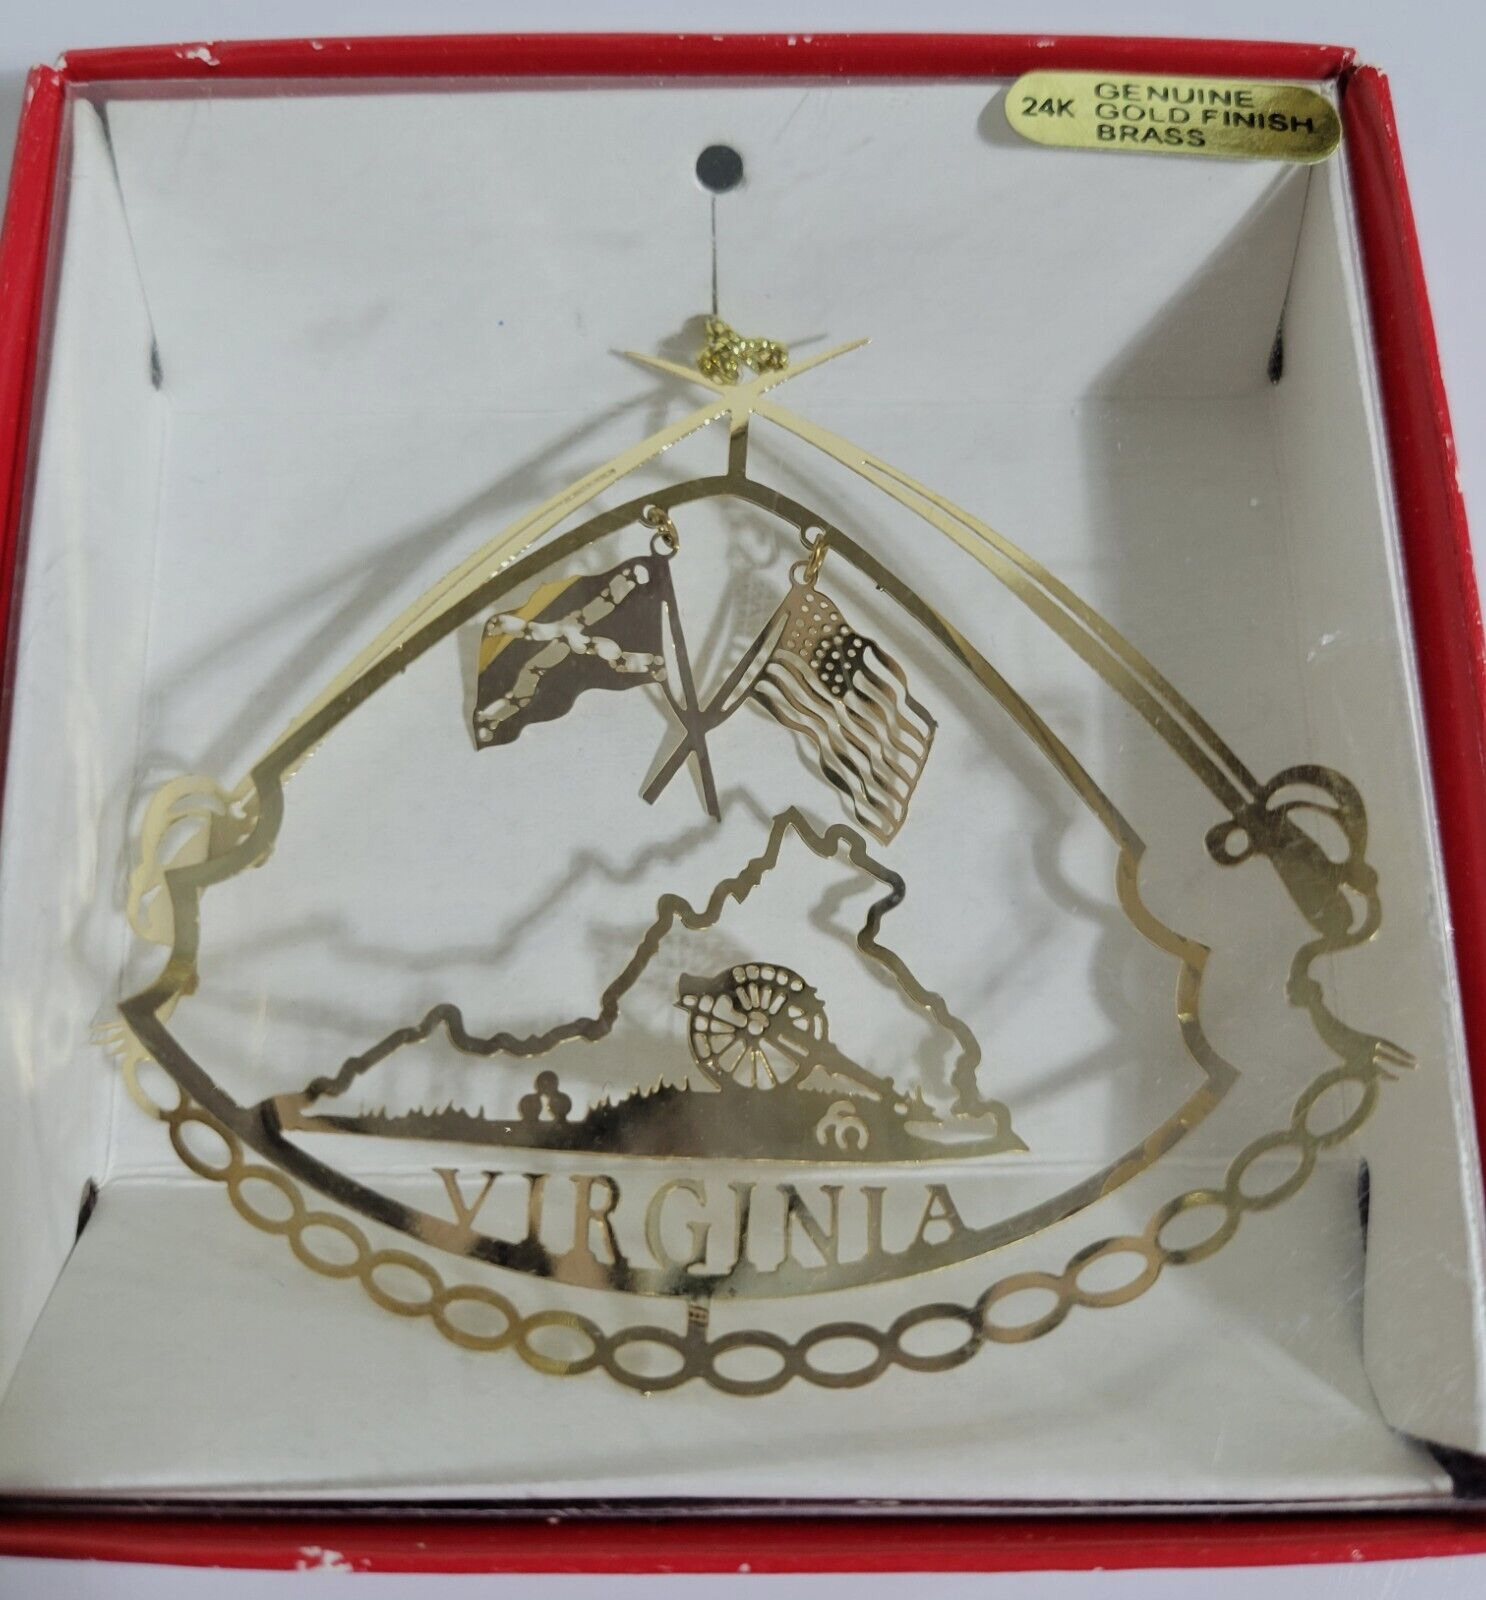 Nations Treasures Ornament Virginia 24K Gold Finish Brass 3D Die Cut Detailed